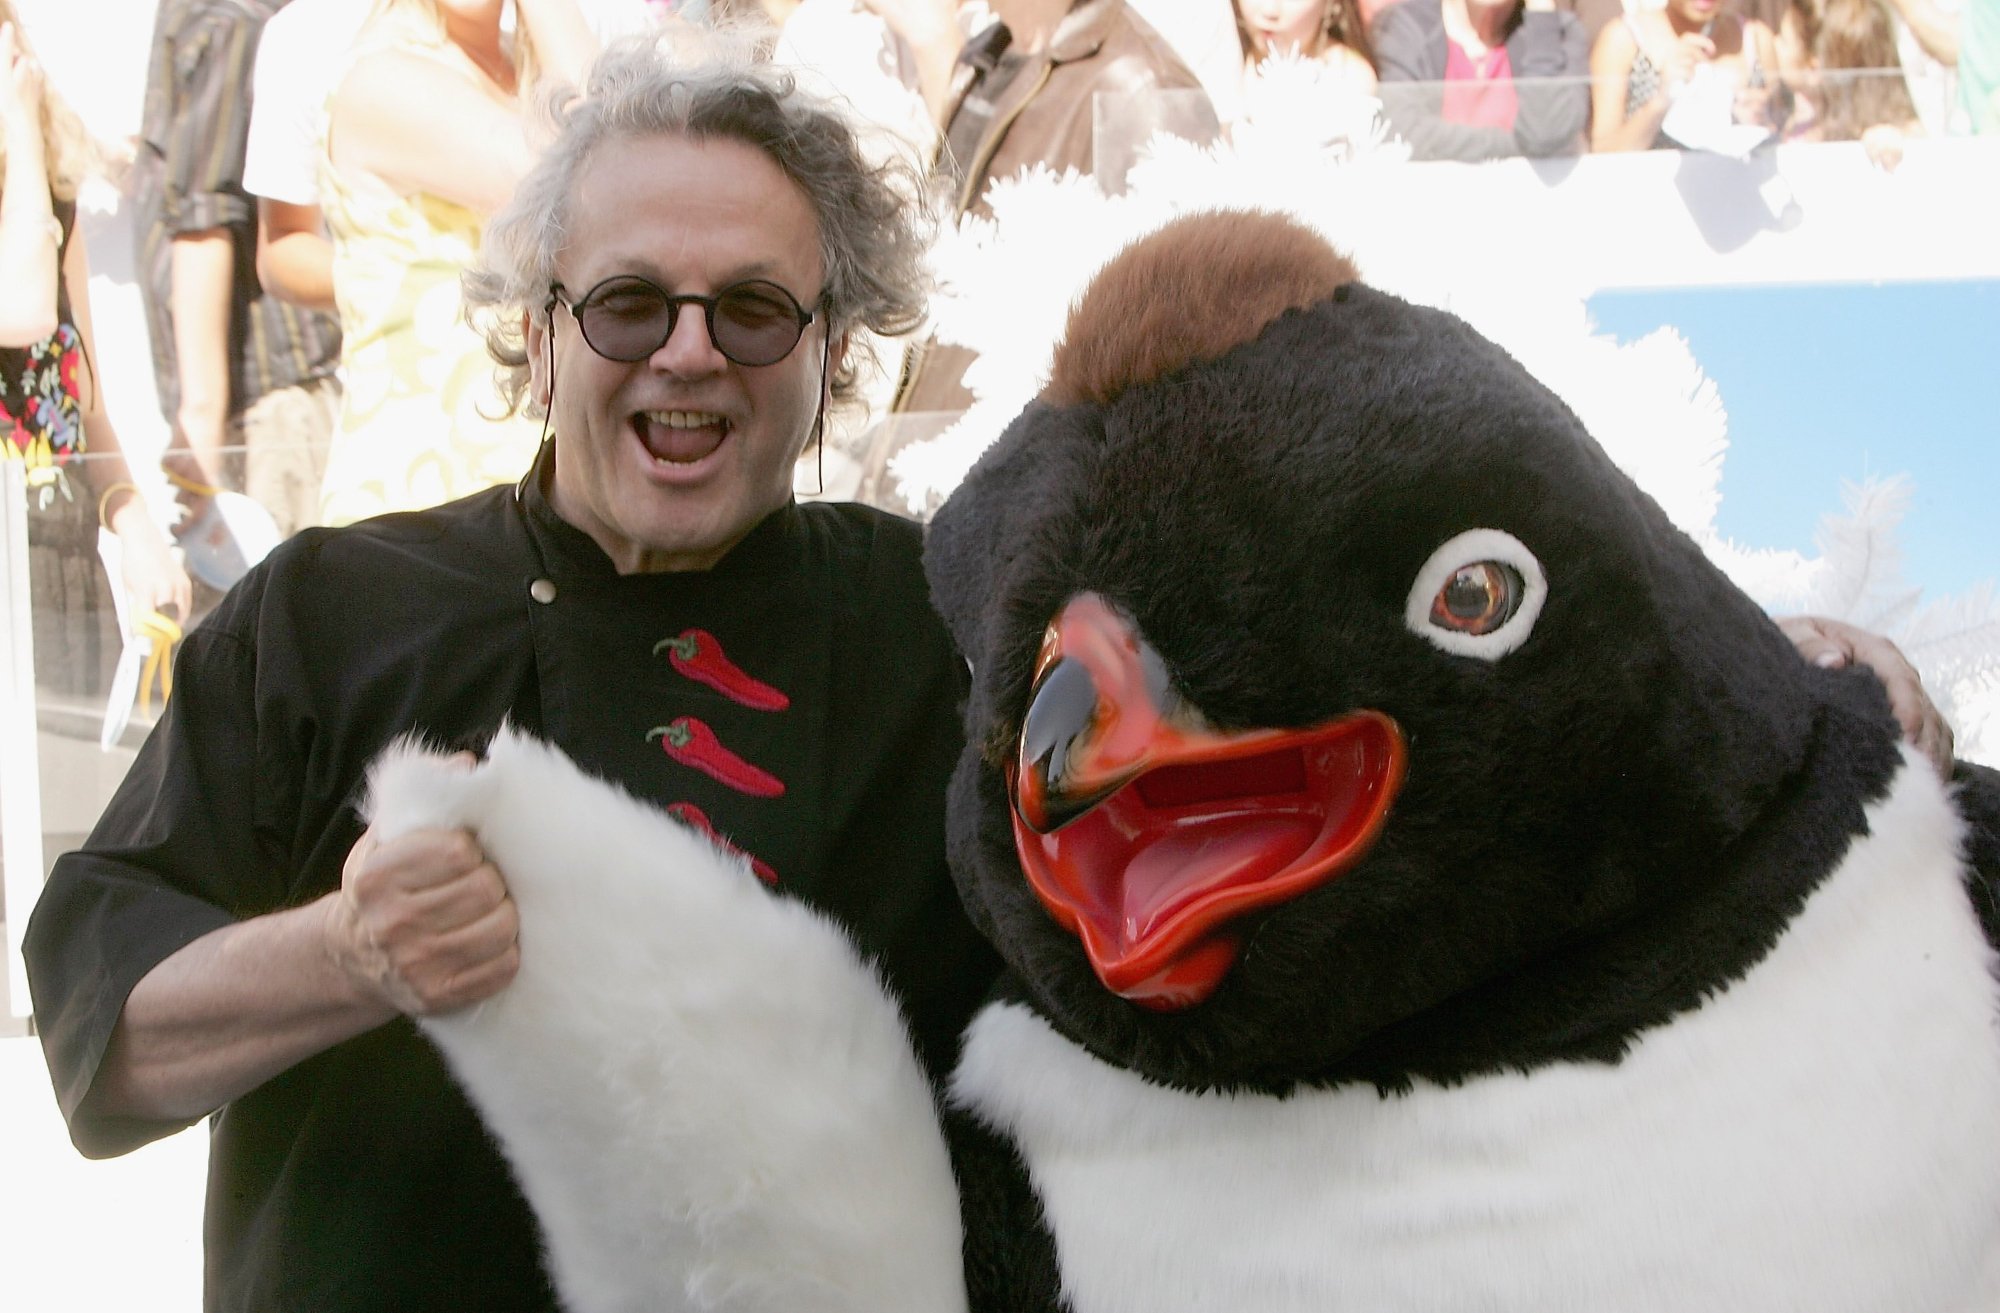 'Happy Feet' filmmaker George Miller wearing black and sunglasses, holding the flipper of a costumed penguin